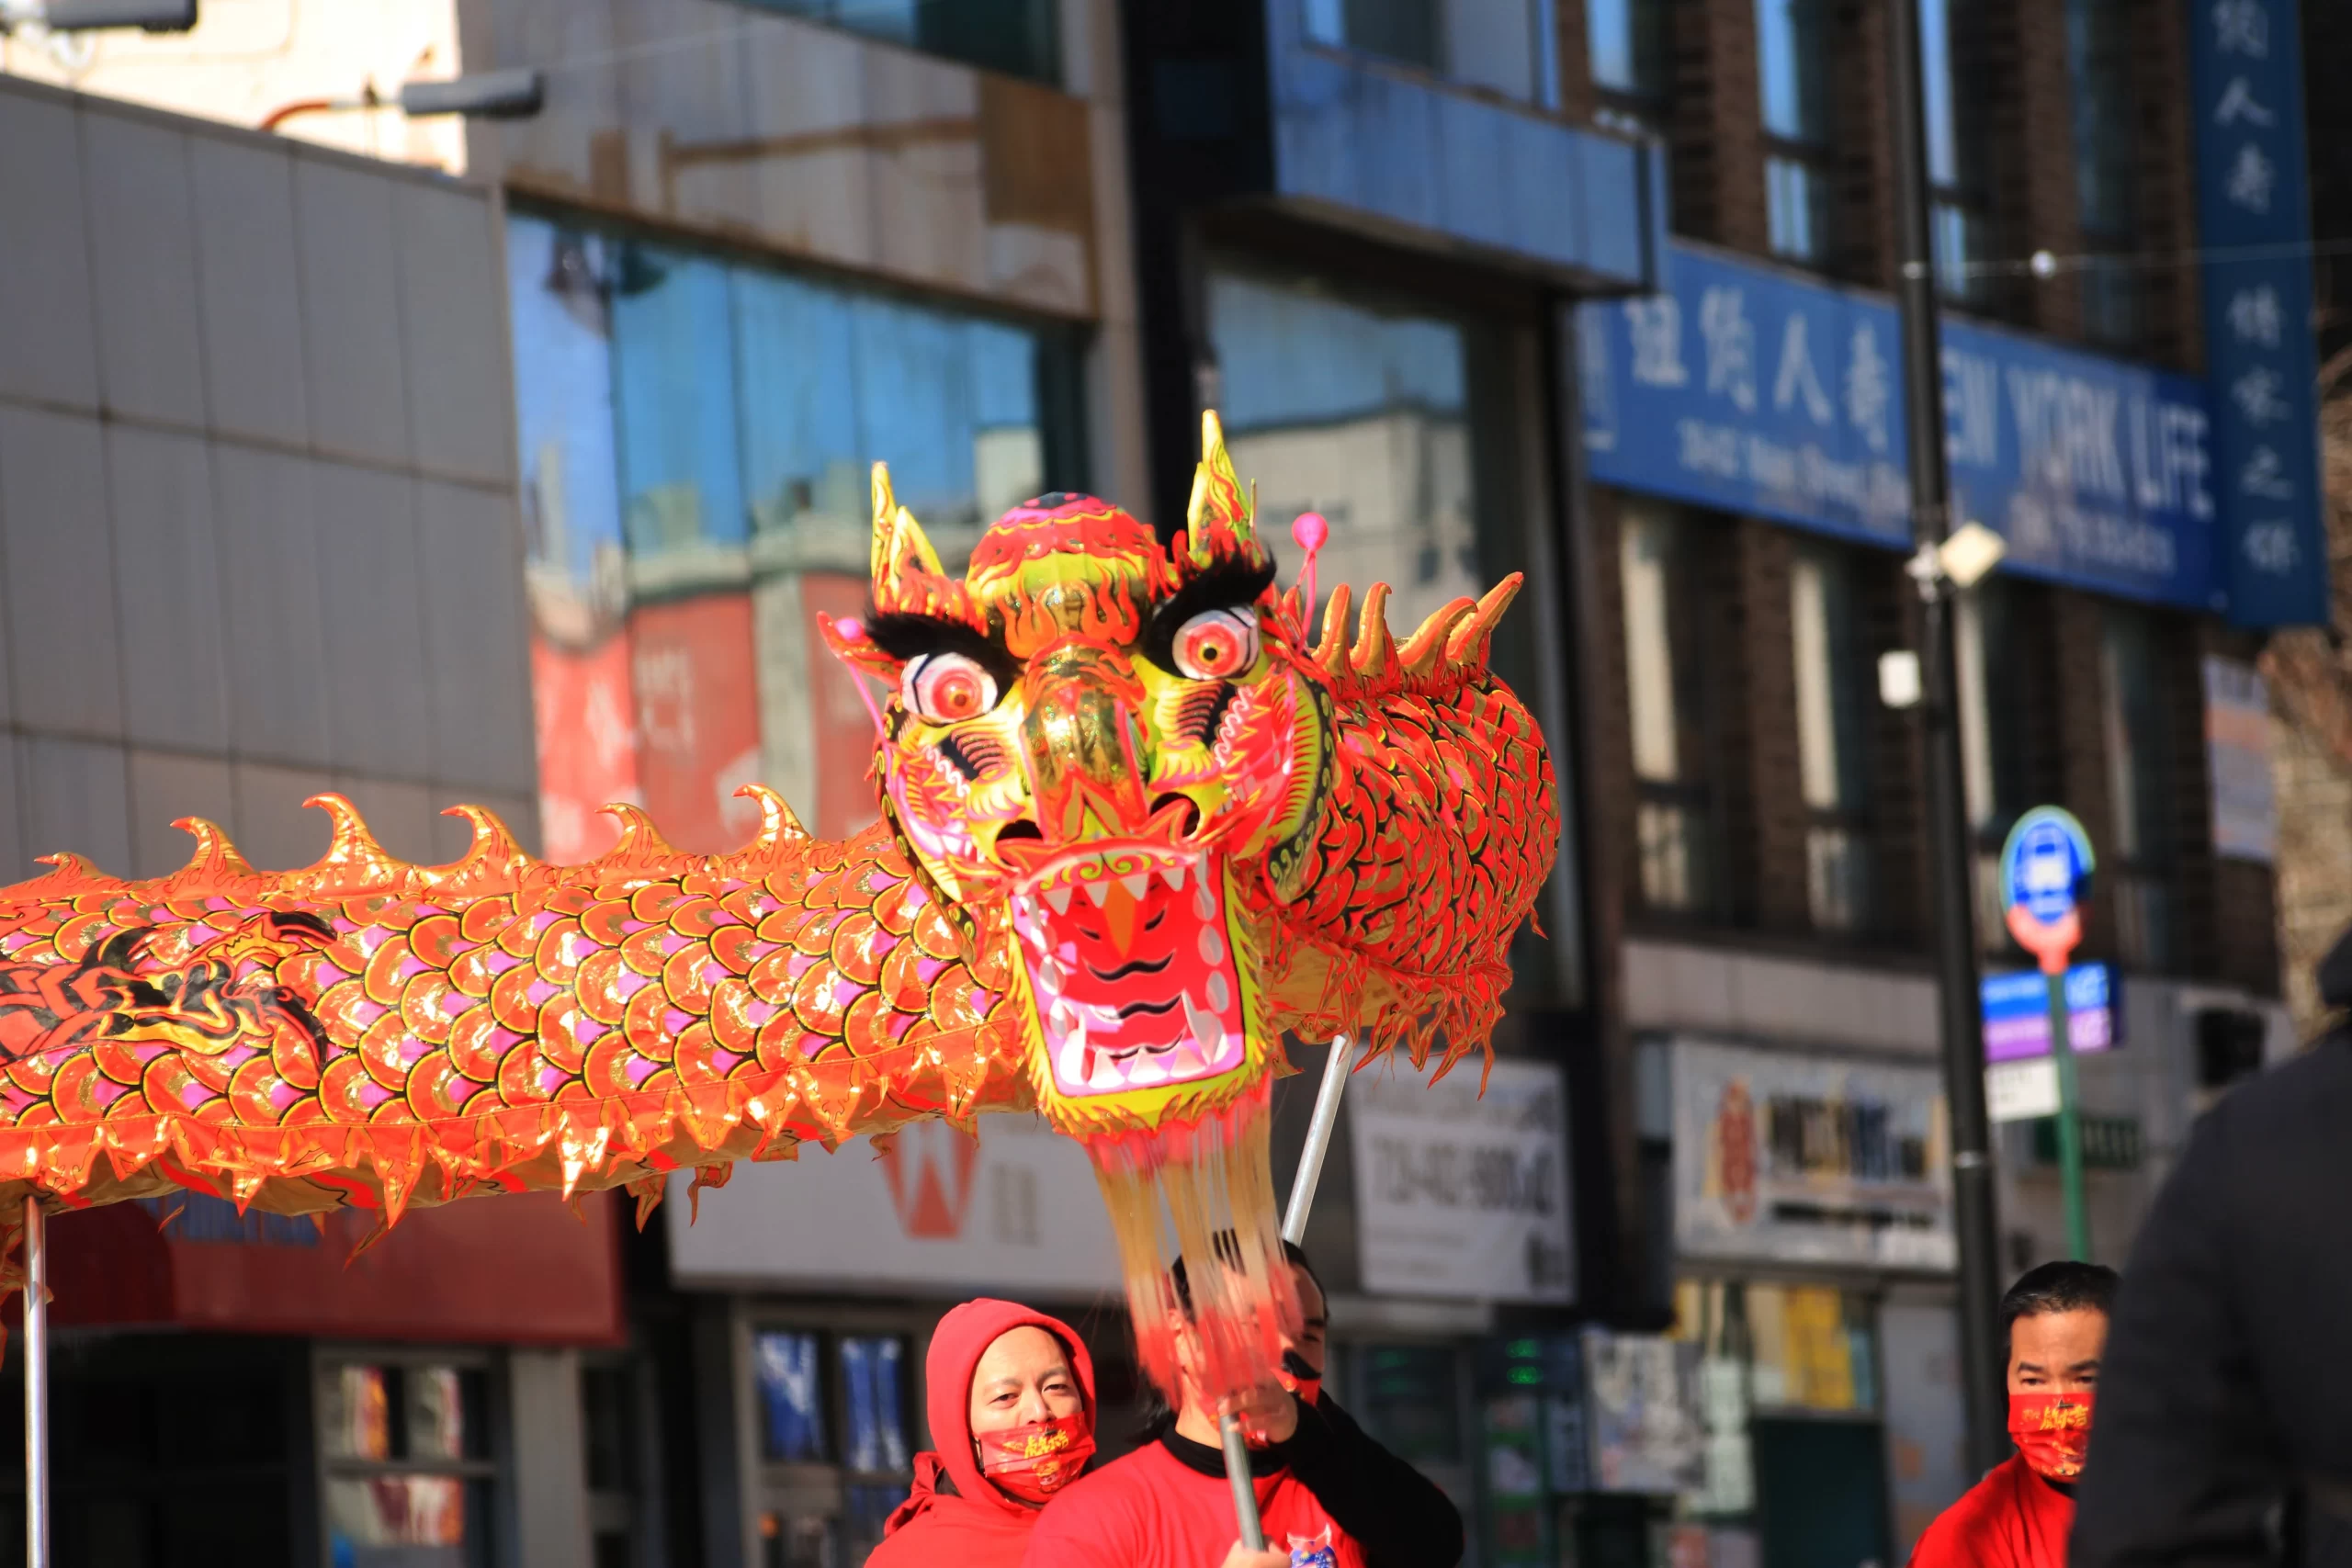 Flushing, Queens, NY, USA Published on February 5, 2022 Free to use under the Unsplash License Residents in Flushing, Queens NY celebrating Lunar New Year in a parade down on the Main Street on February 5, 2022. As Omicron variant surge fades, the community wishes for a better new year.